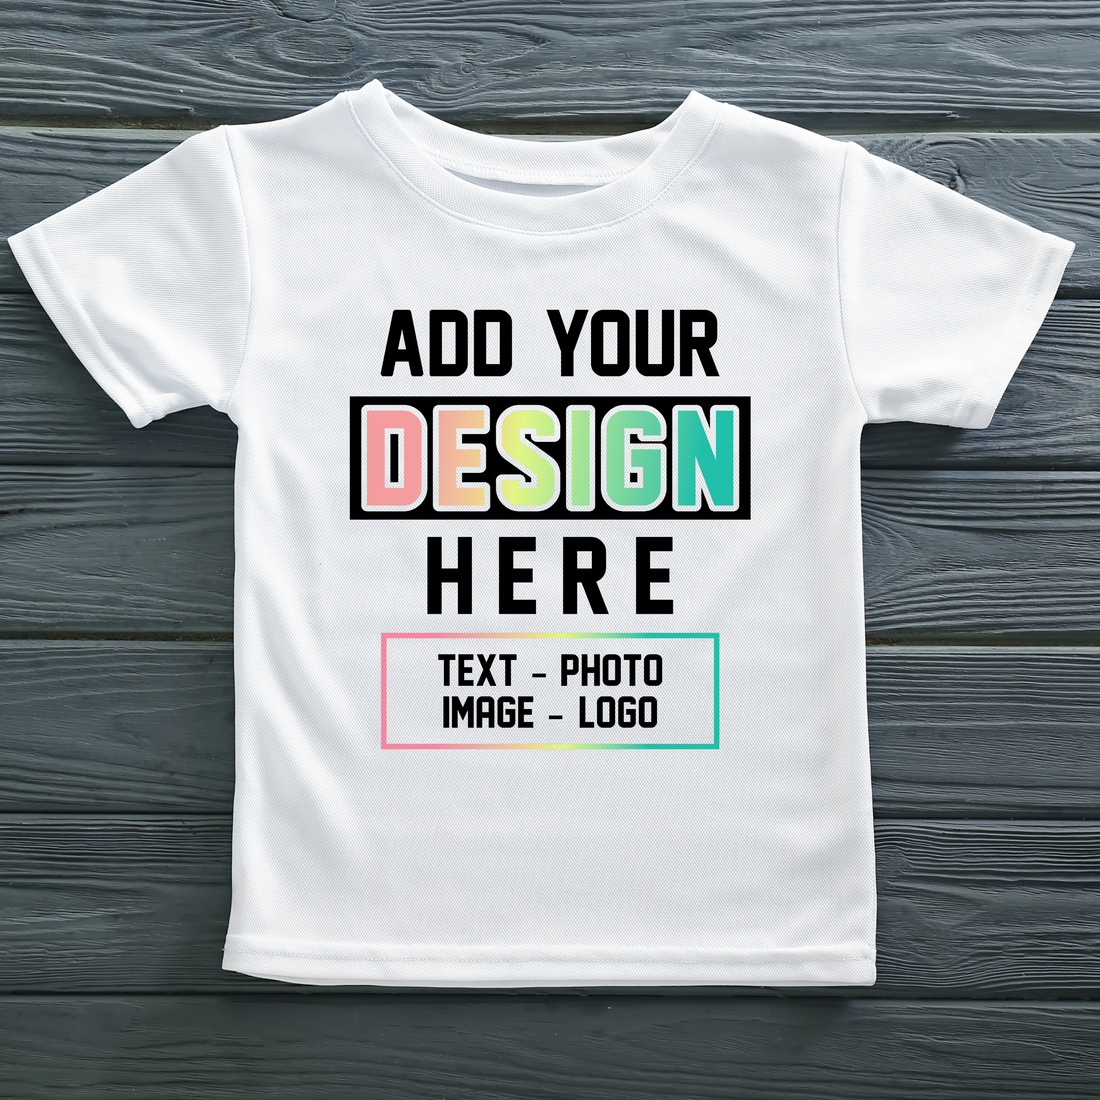 Create Your Personalized Merchandise Here